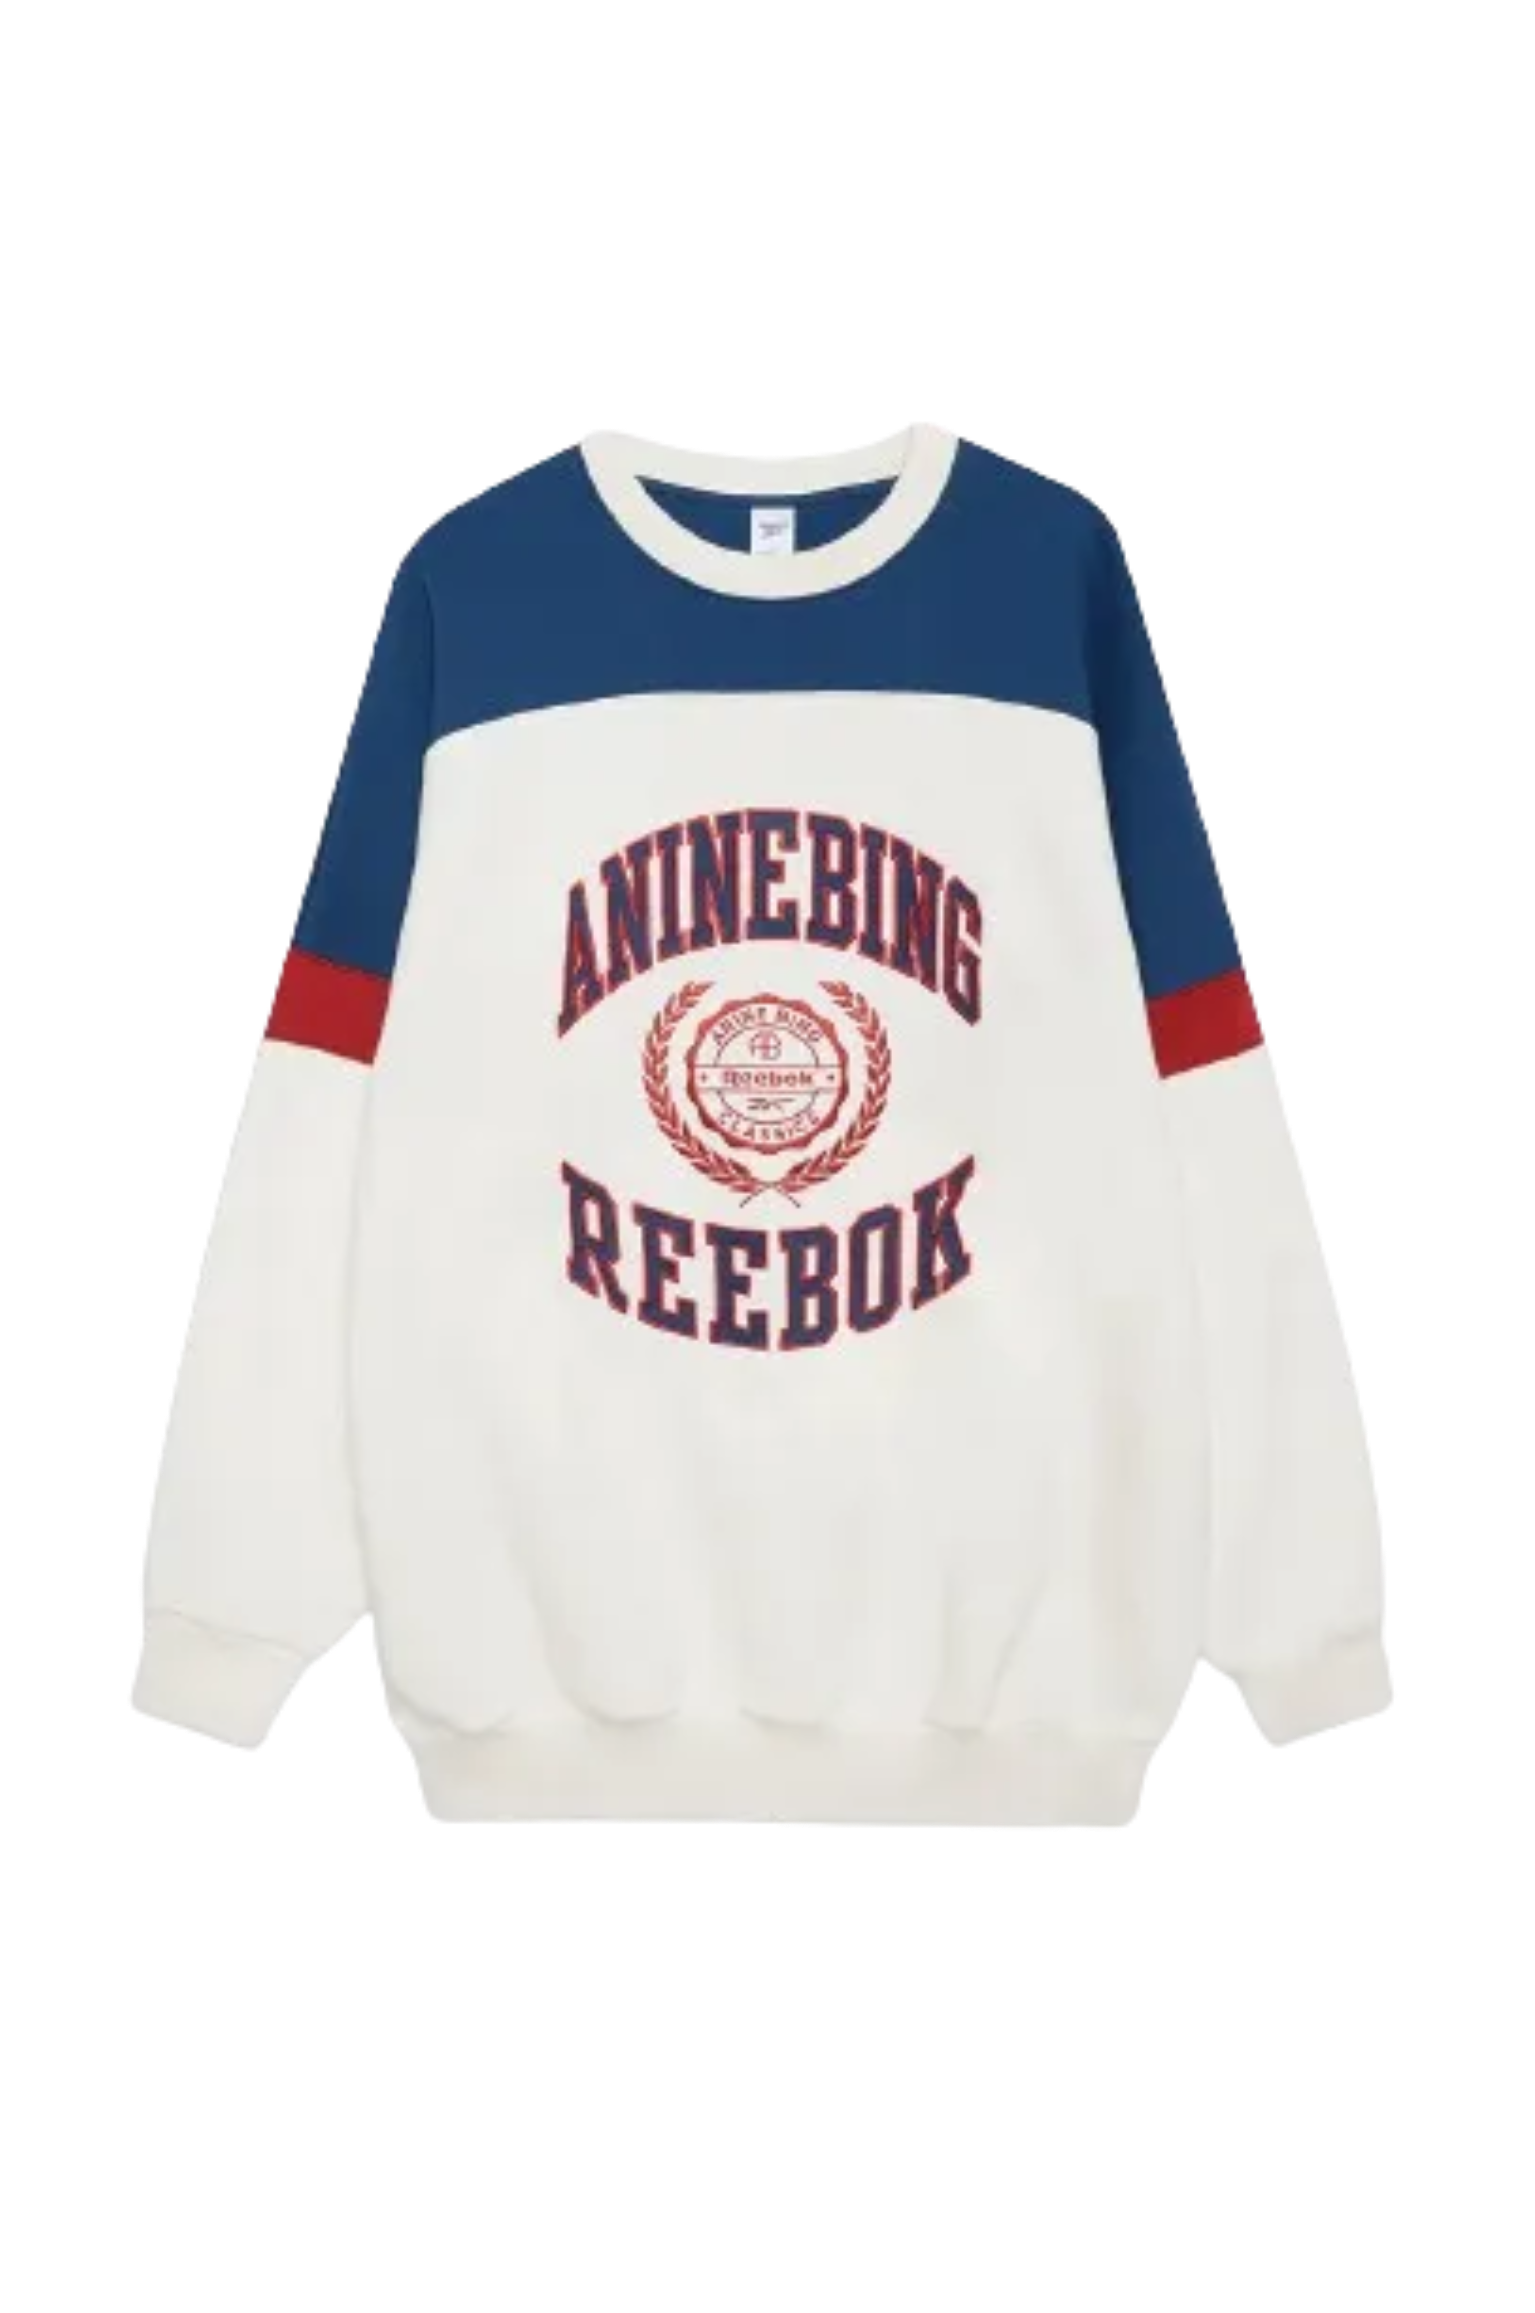 Anine Bing Sweatshirt: Style, Comfort, and Quality in Every Stitch